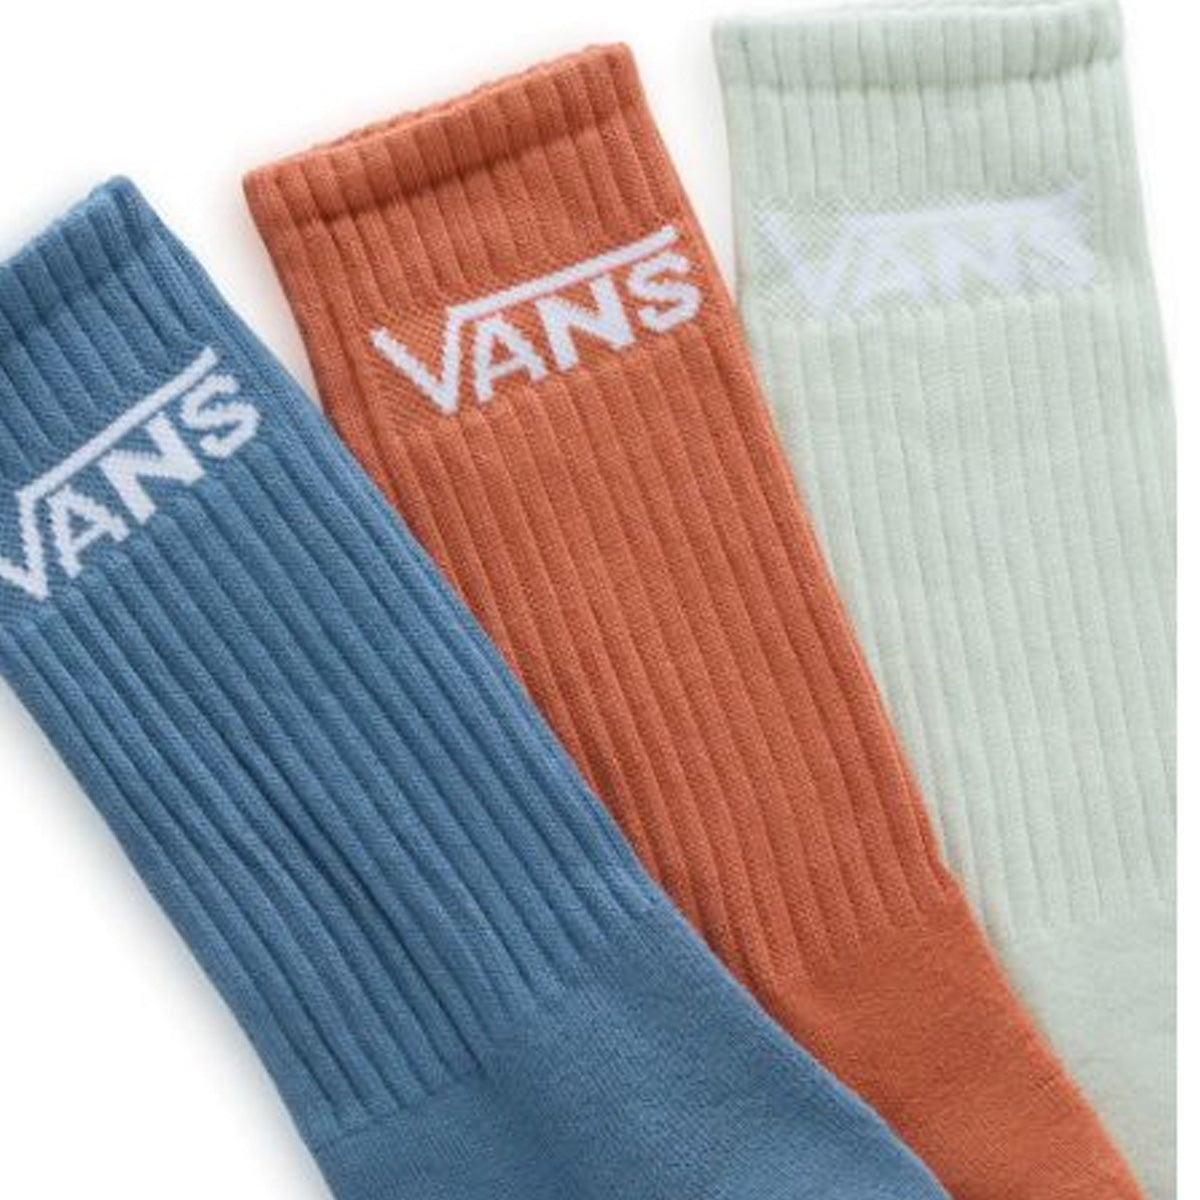 Vans classic logo crew socks 3 pack with blue orange and mint pairs. Free uk shipping over £50